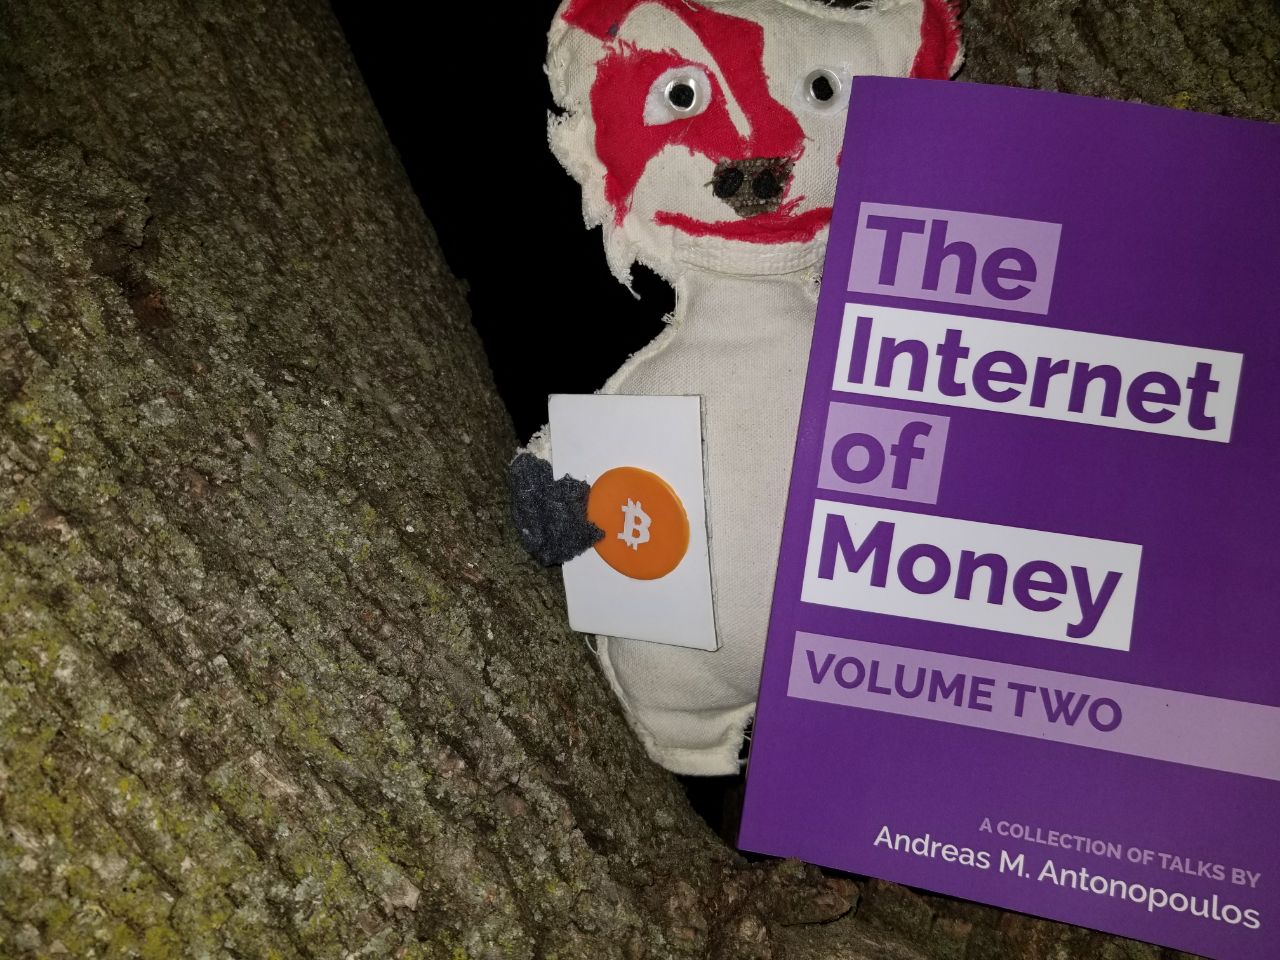 andreas-antonopoulos-is-back-the-internet-of-money-volume-two